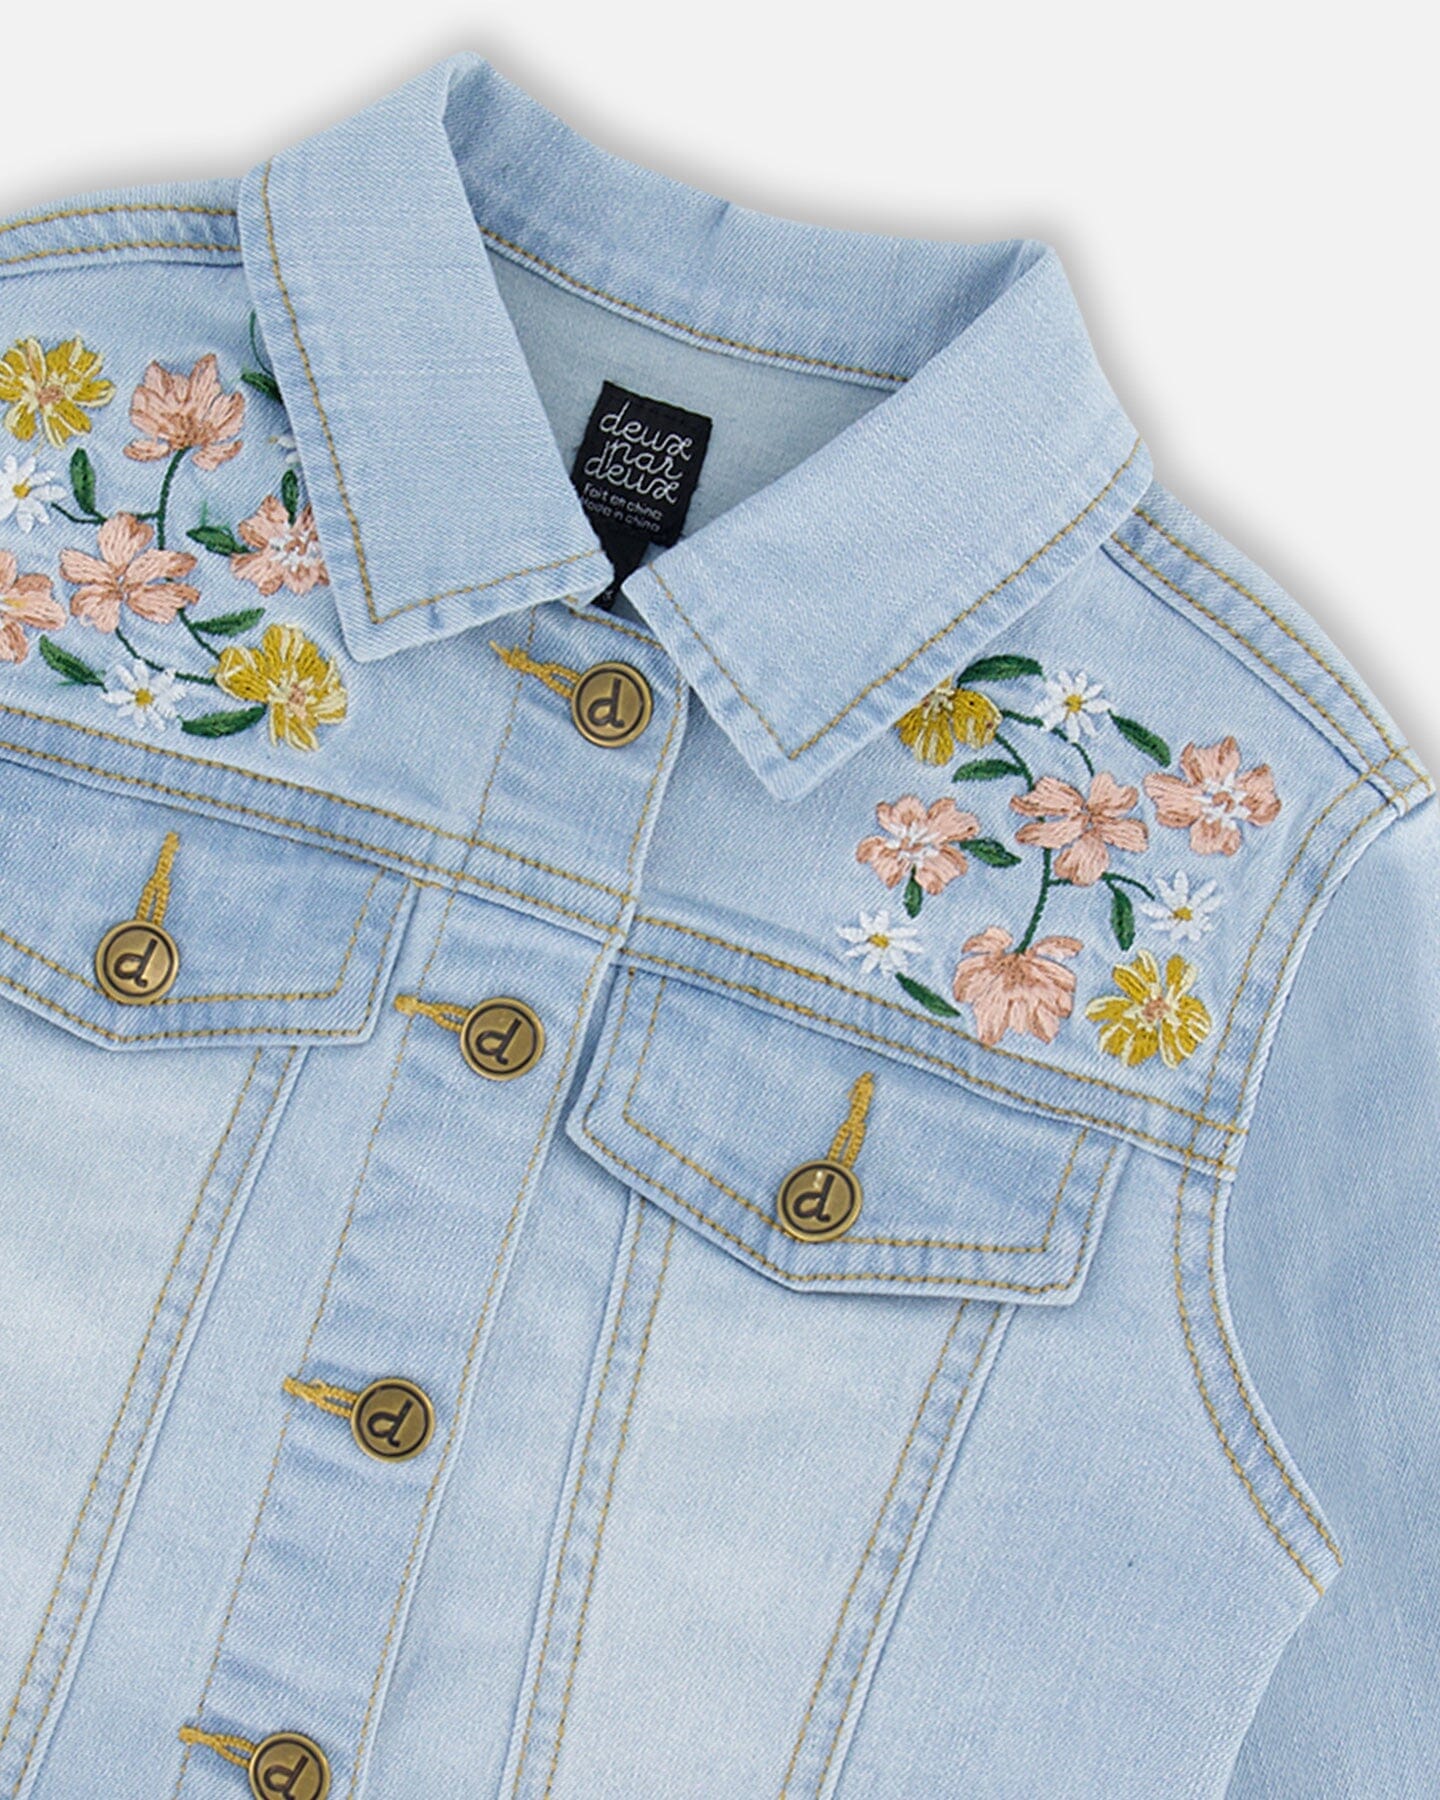 Jean Jacket With Embroidery